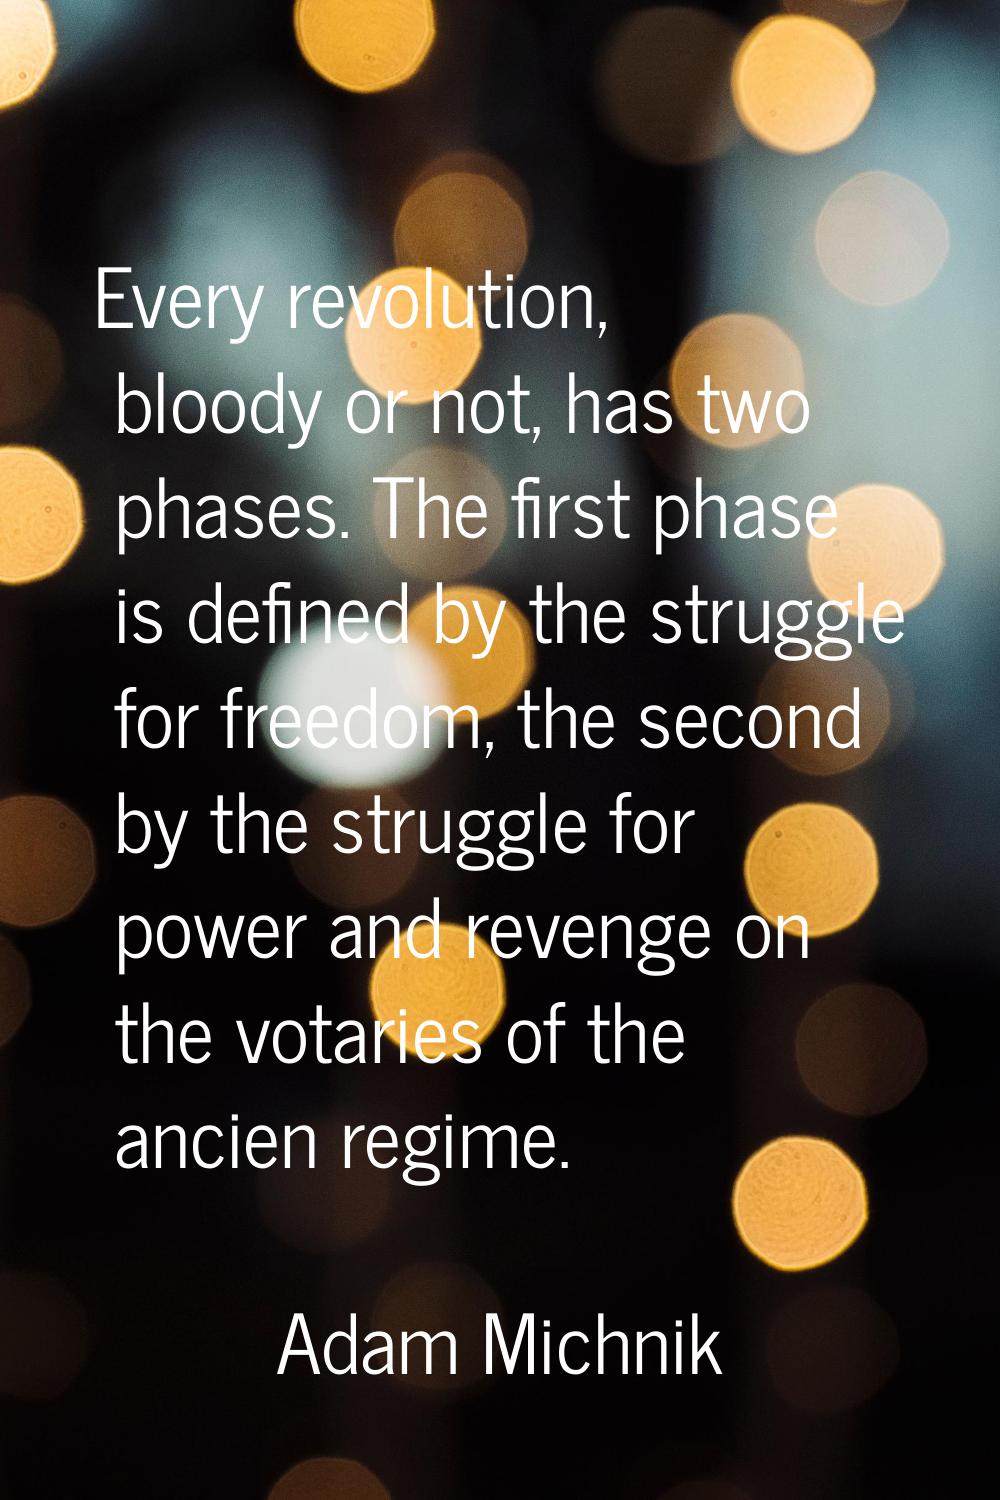 Every revolution, bloody or not, has two phases. The first phase is defined by the struggle for fre